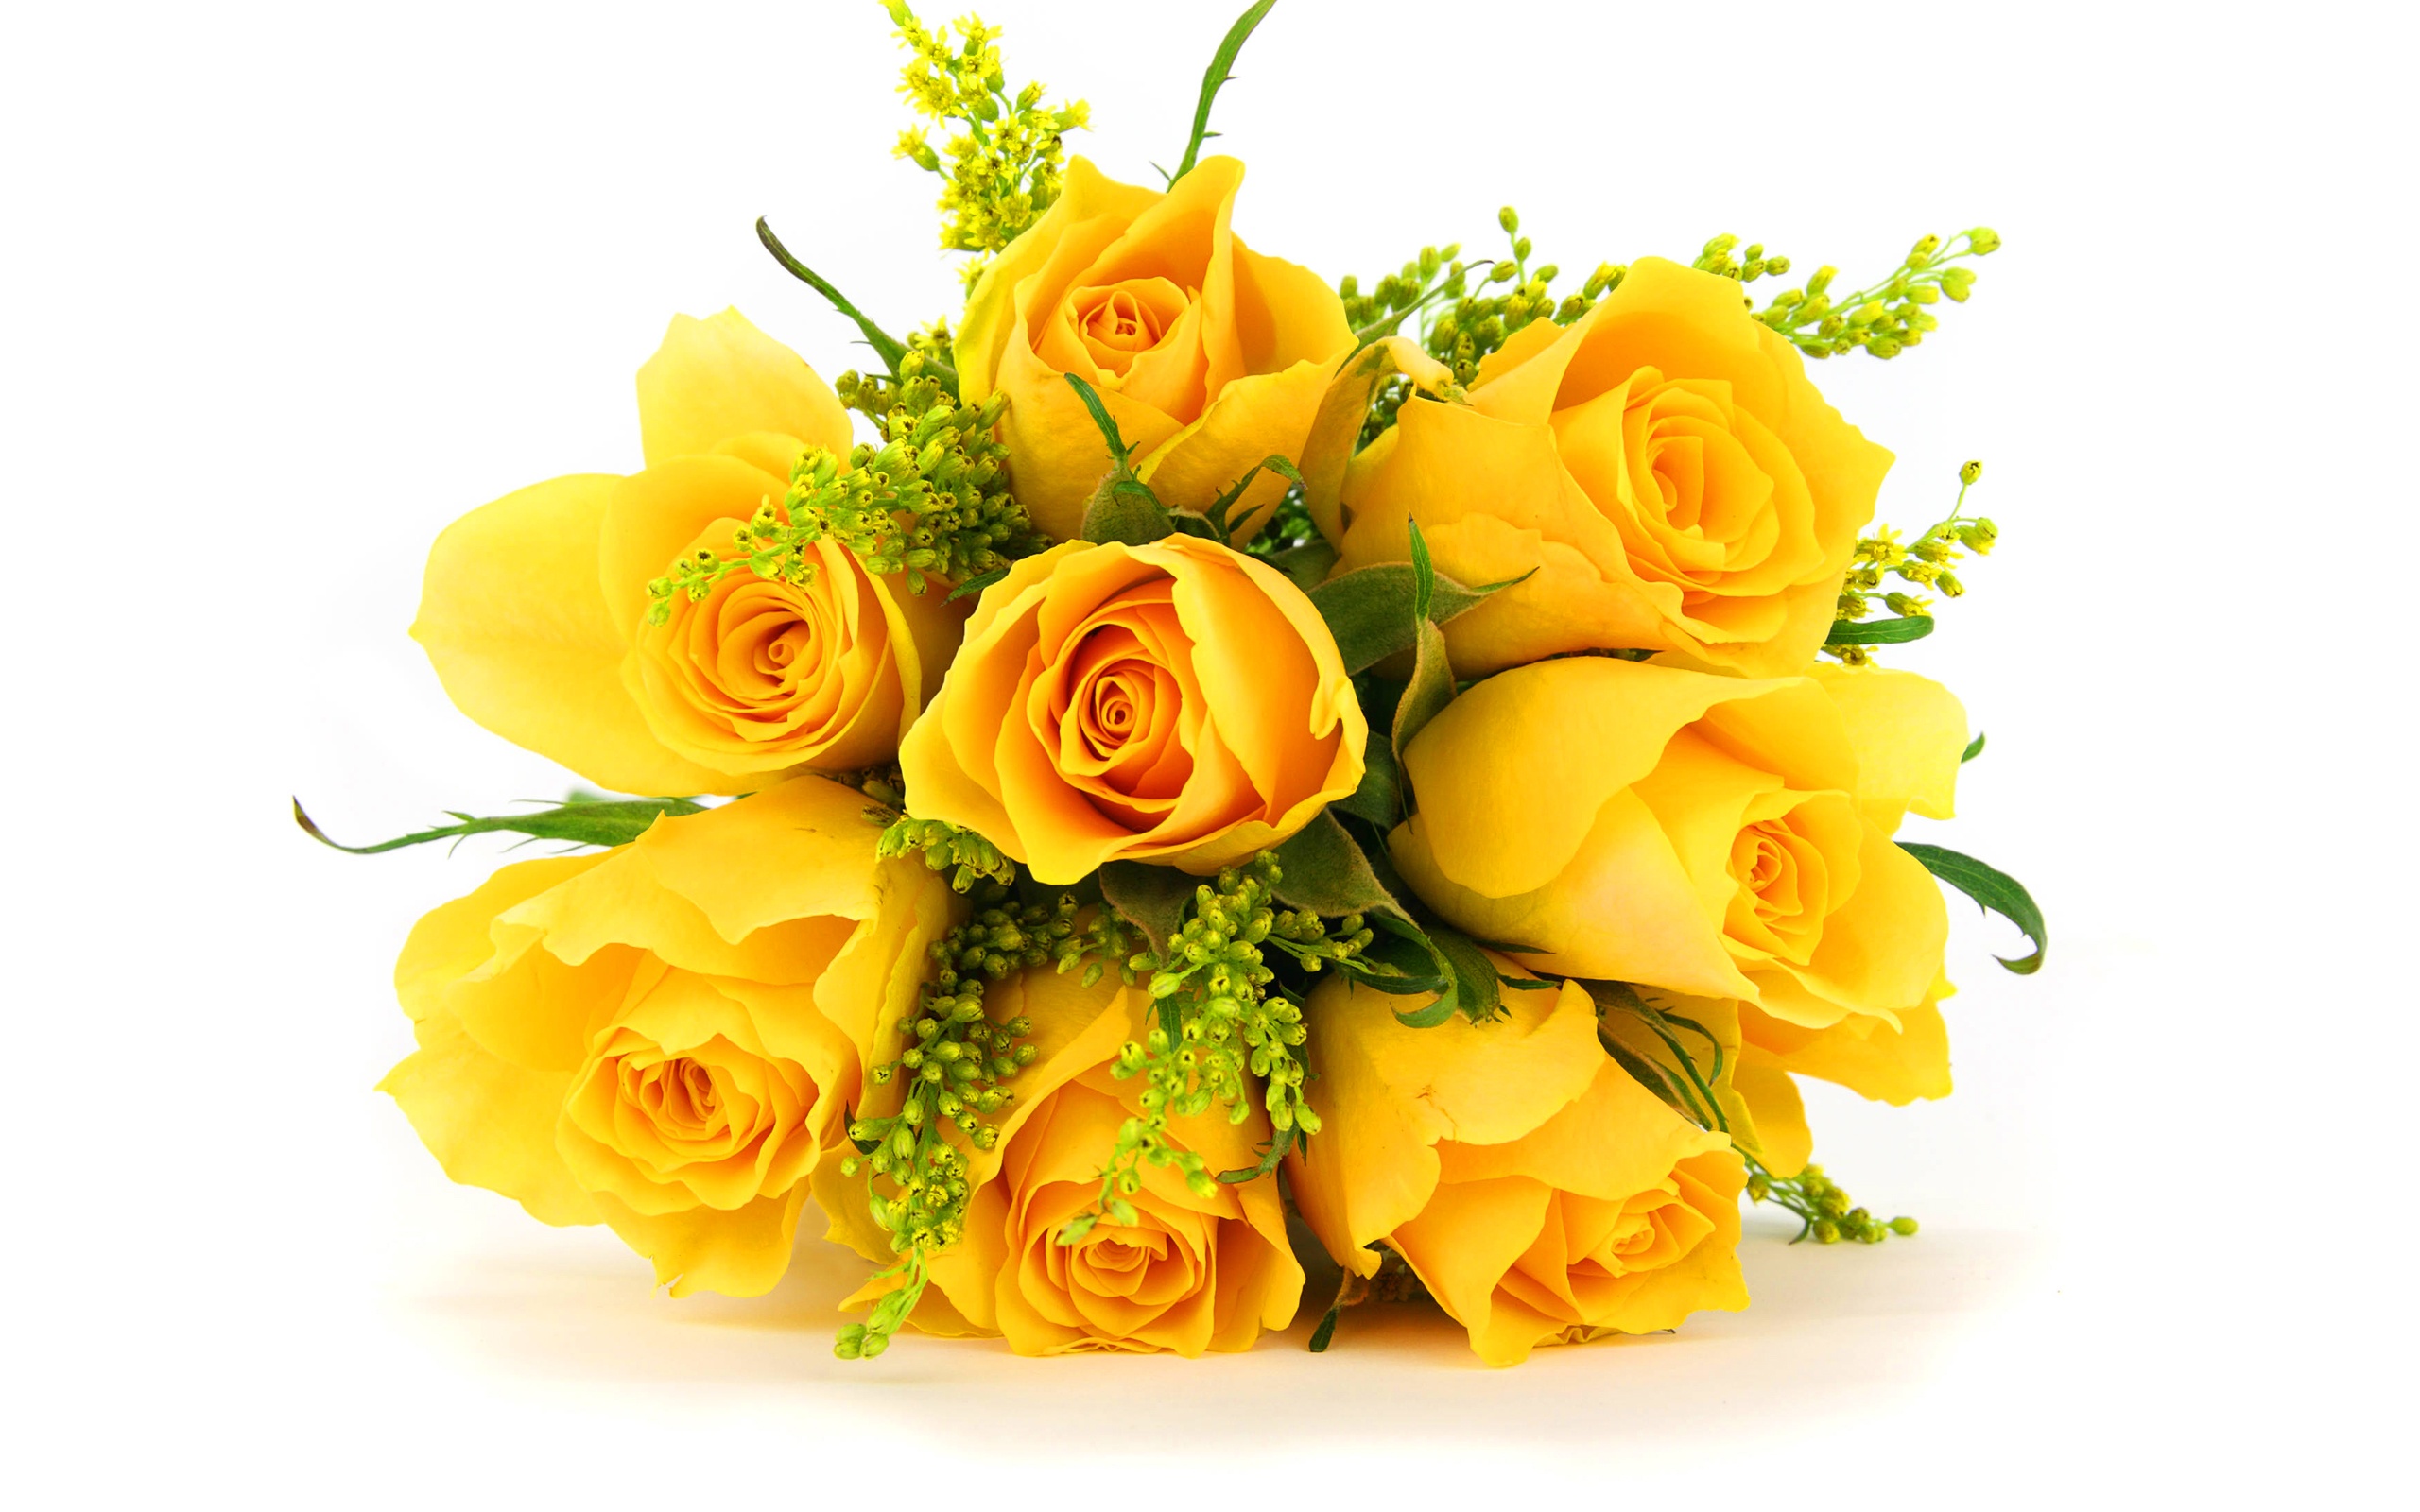 Bunch-Of-Yellow-Roses-With-White-Background-HD-Latest-Wallpaper.jpg